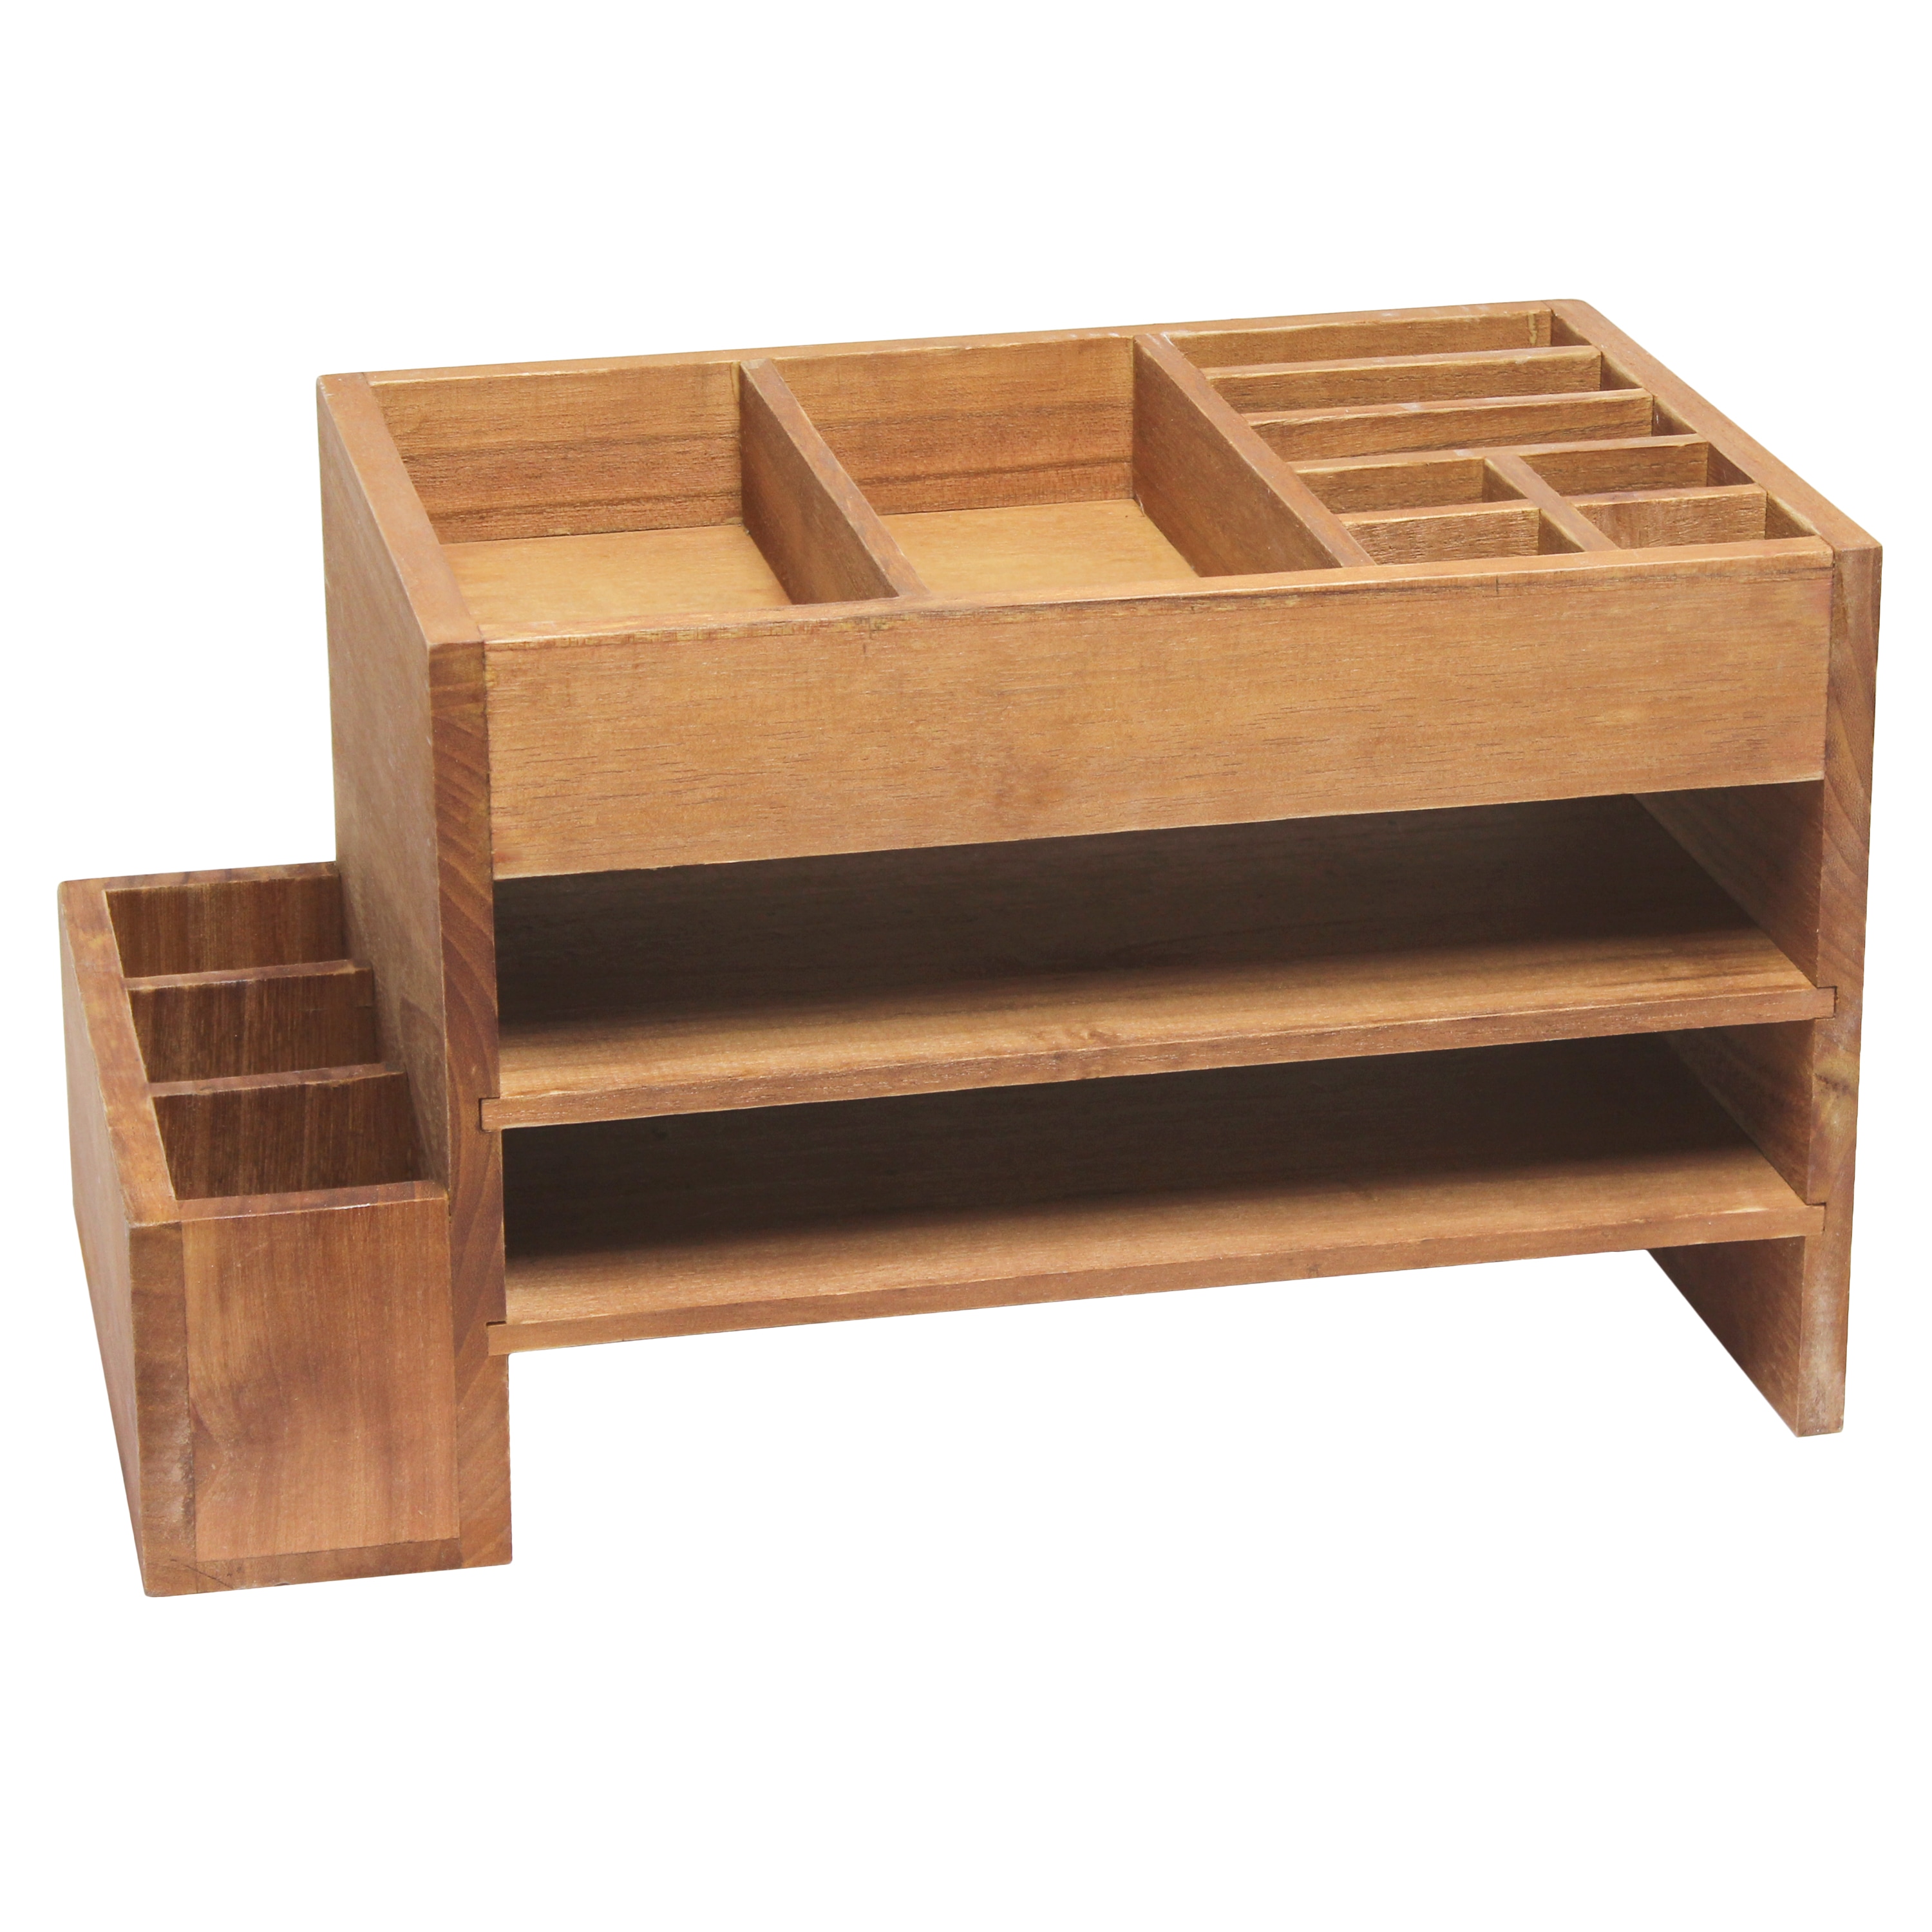 Neat Office Desktop A4 File Storage Organizer Color : A1 Wooden Desktop Storage Box with 2-Layer Lockable Drawers 